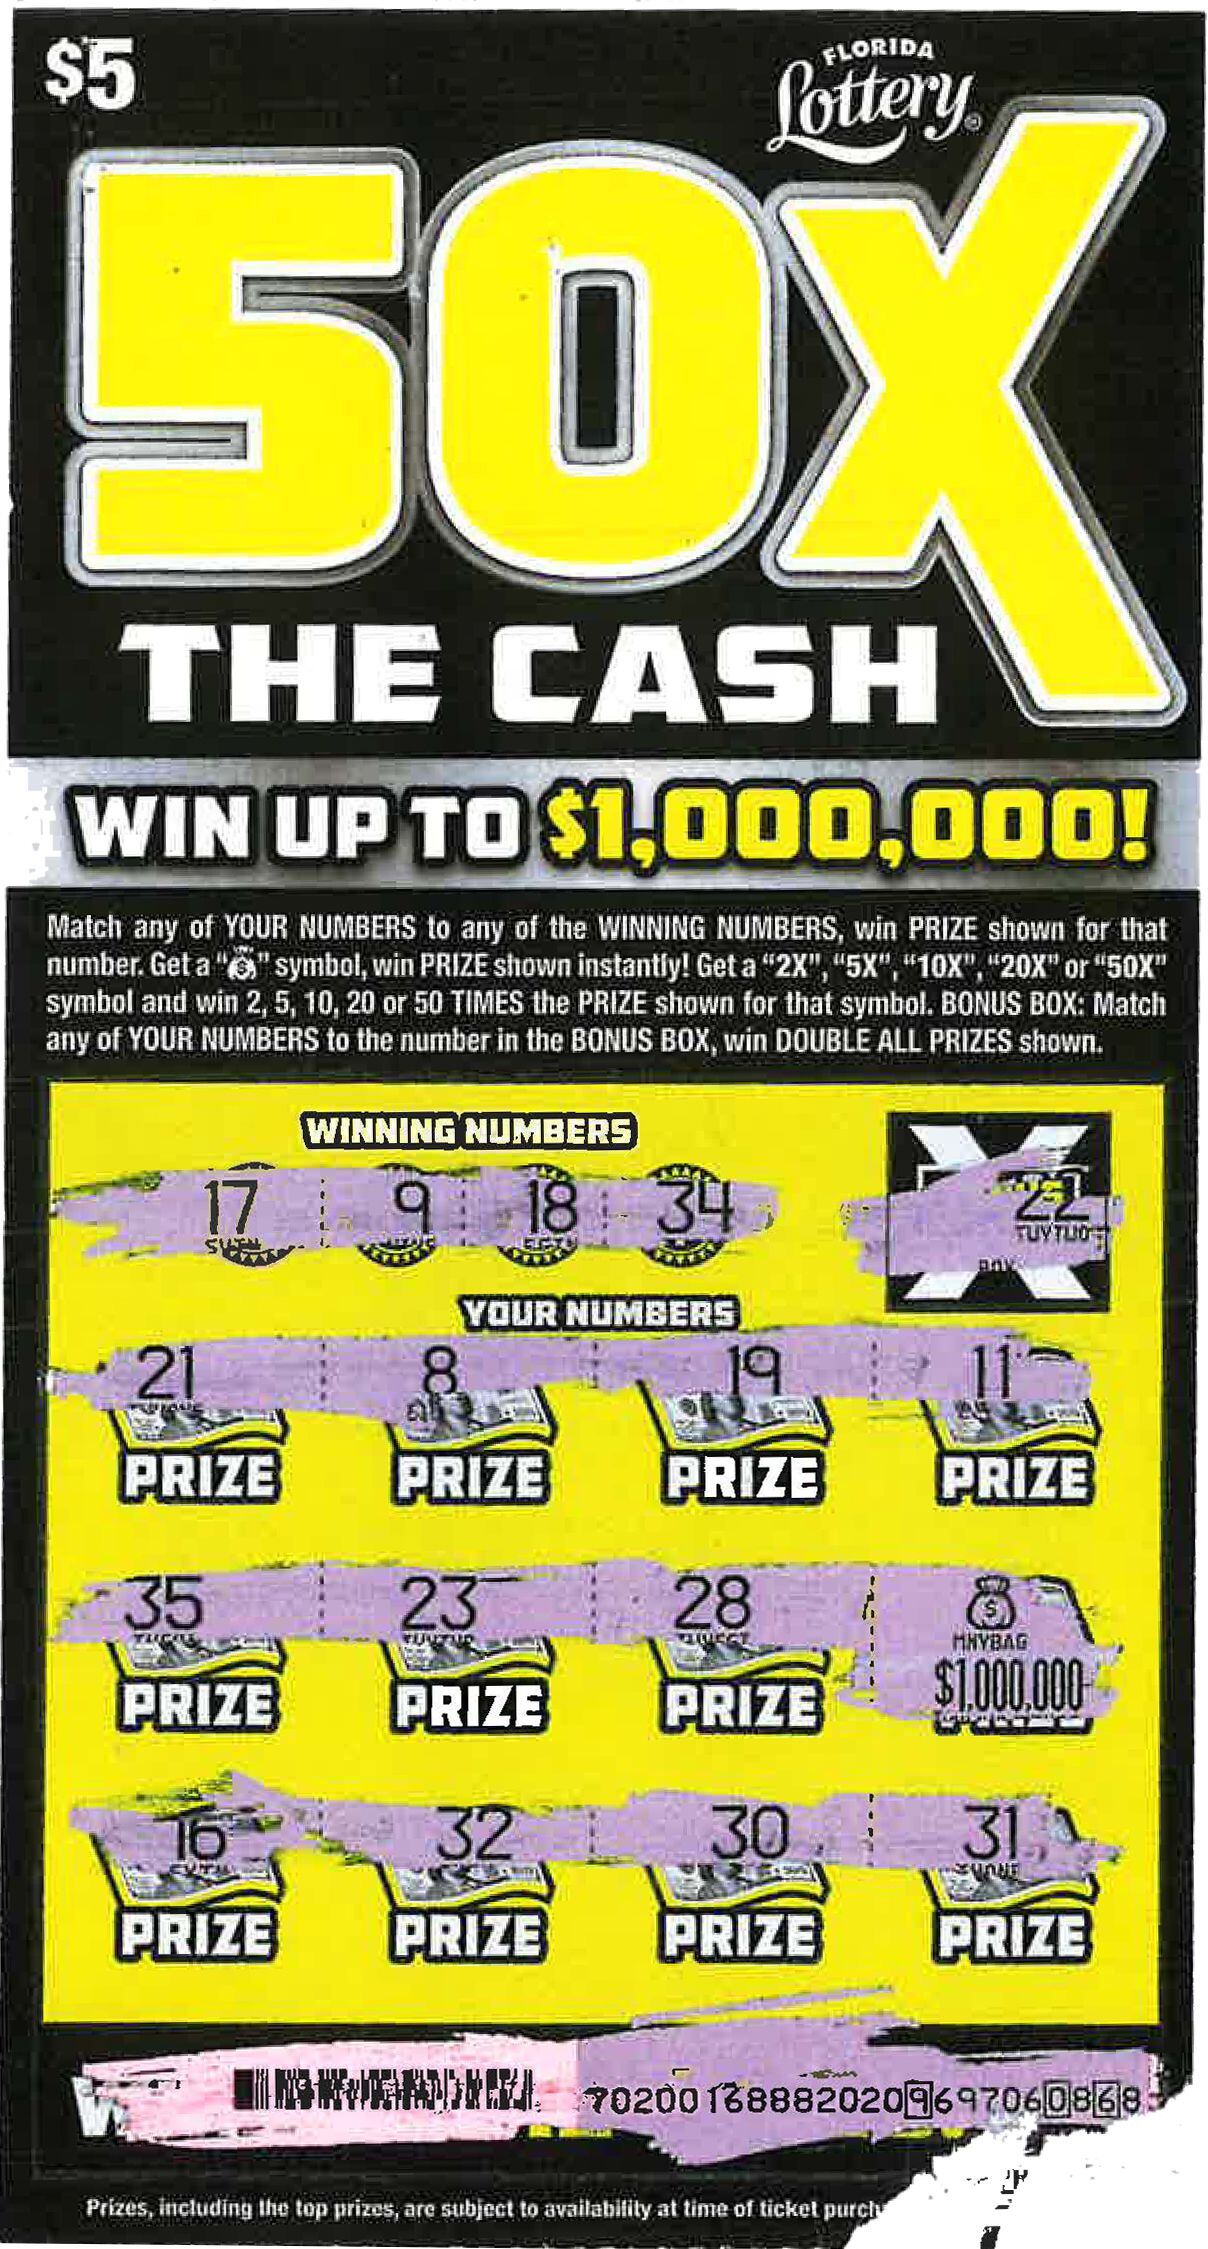 Jacksonville man wins a 'fast' million with scratch-off lottery game